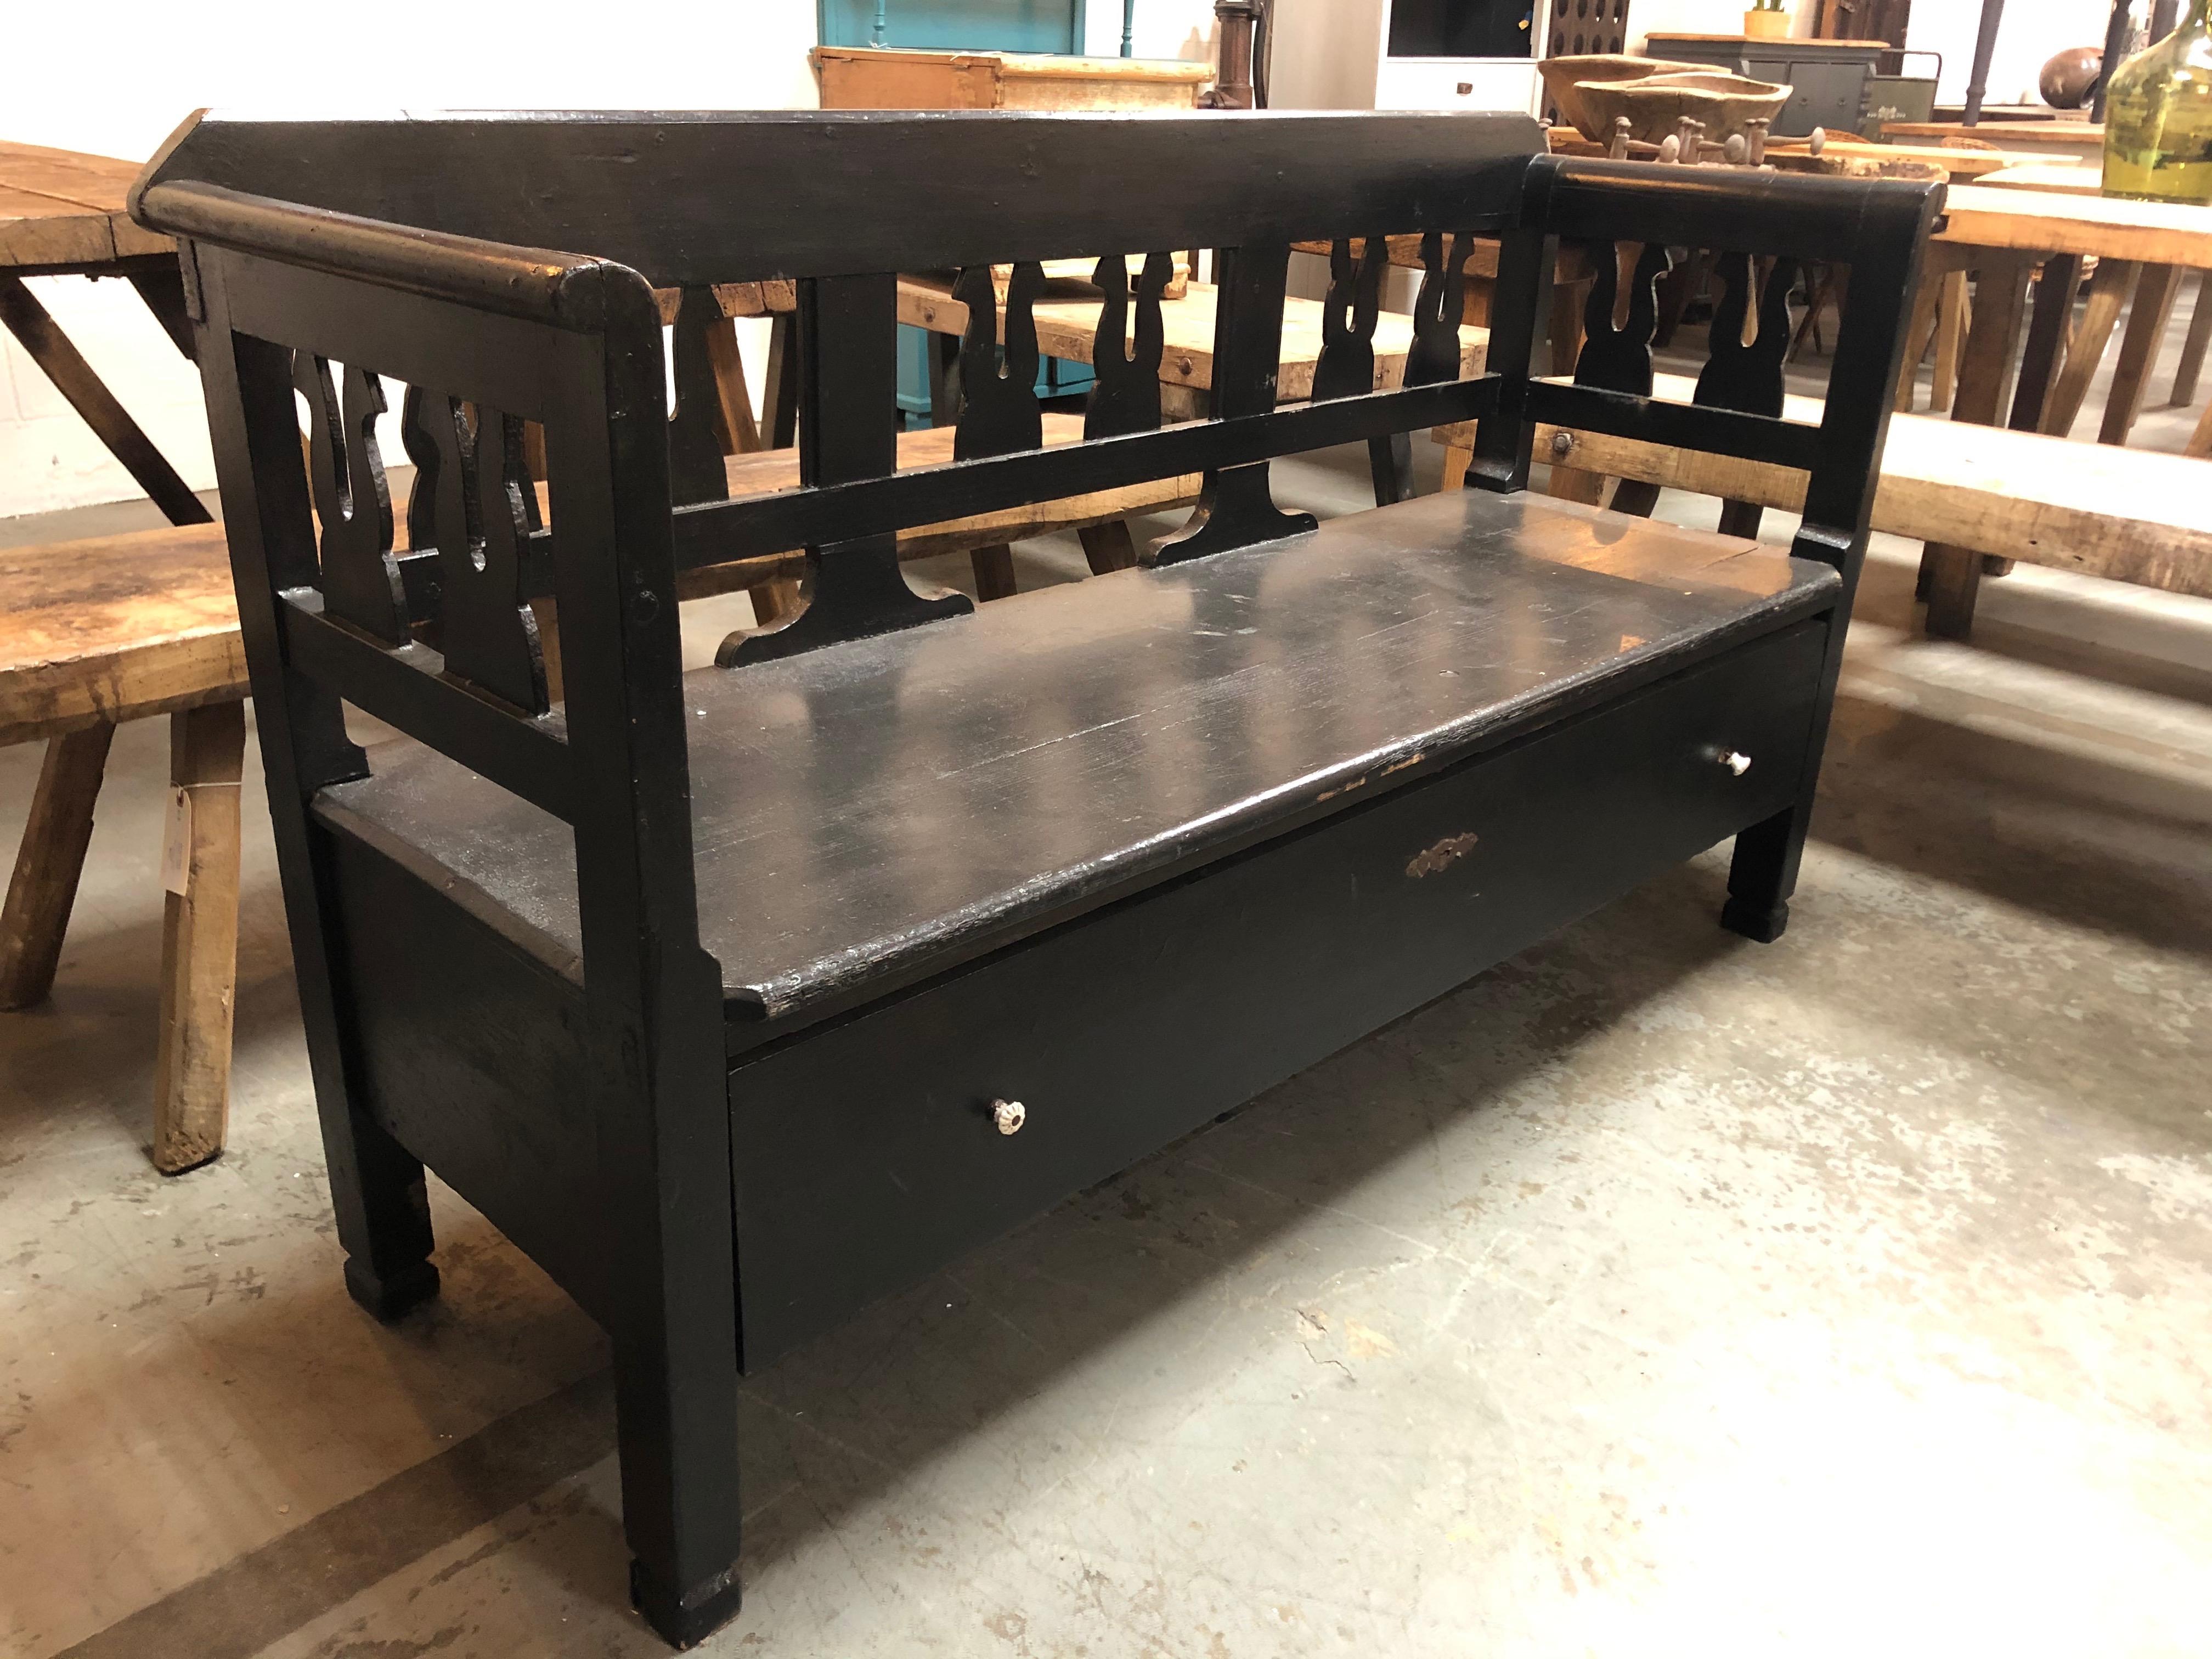 Antique bench from Europe with a storage drawer to keep linens or footwear. Detailed wood carving wraps around the back and sides, adding character to any space or entryway.